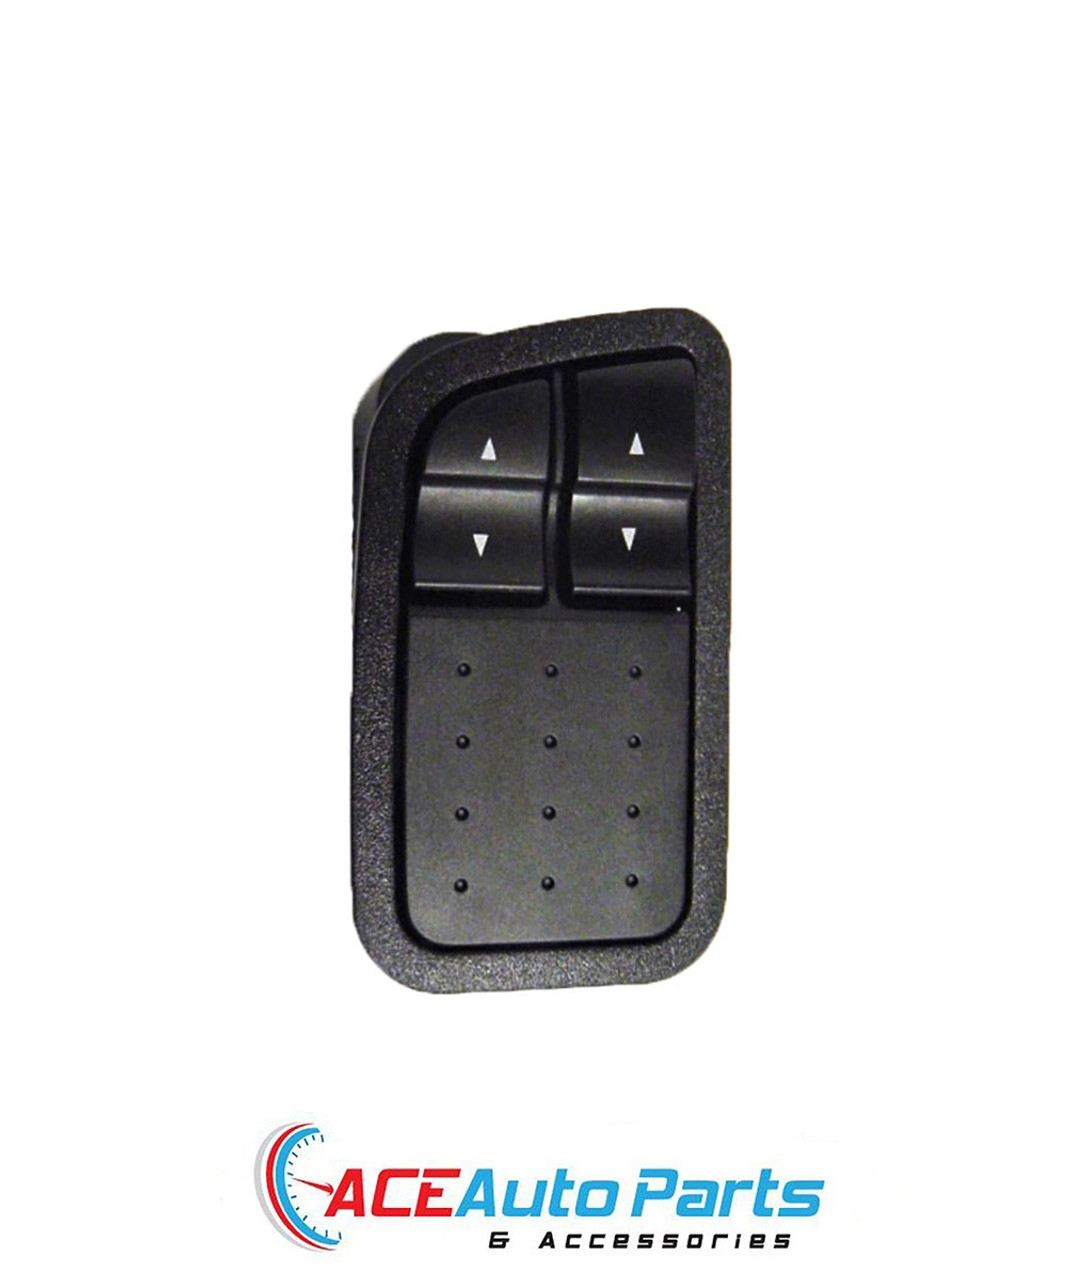 Power Window Switch for Ford Falcon BA BF Front Windows 2002-2008